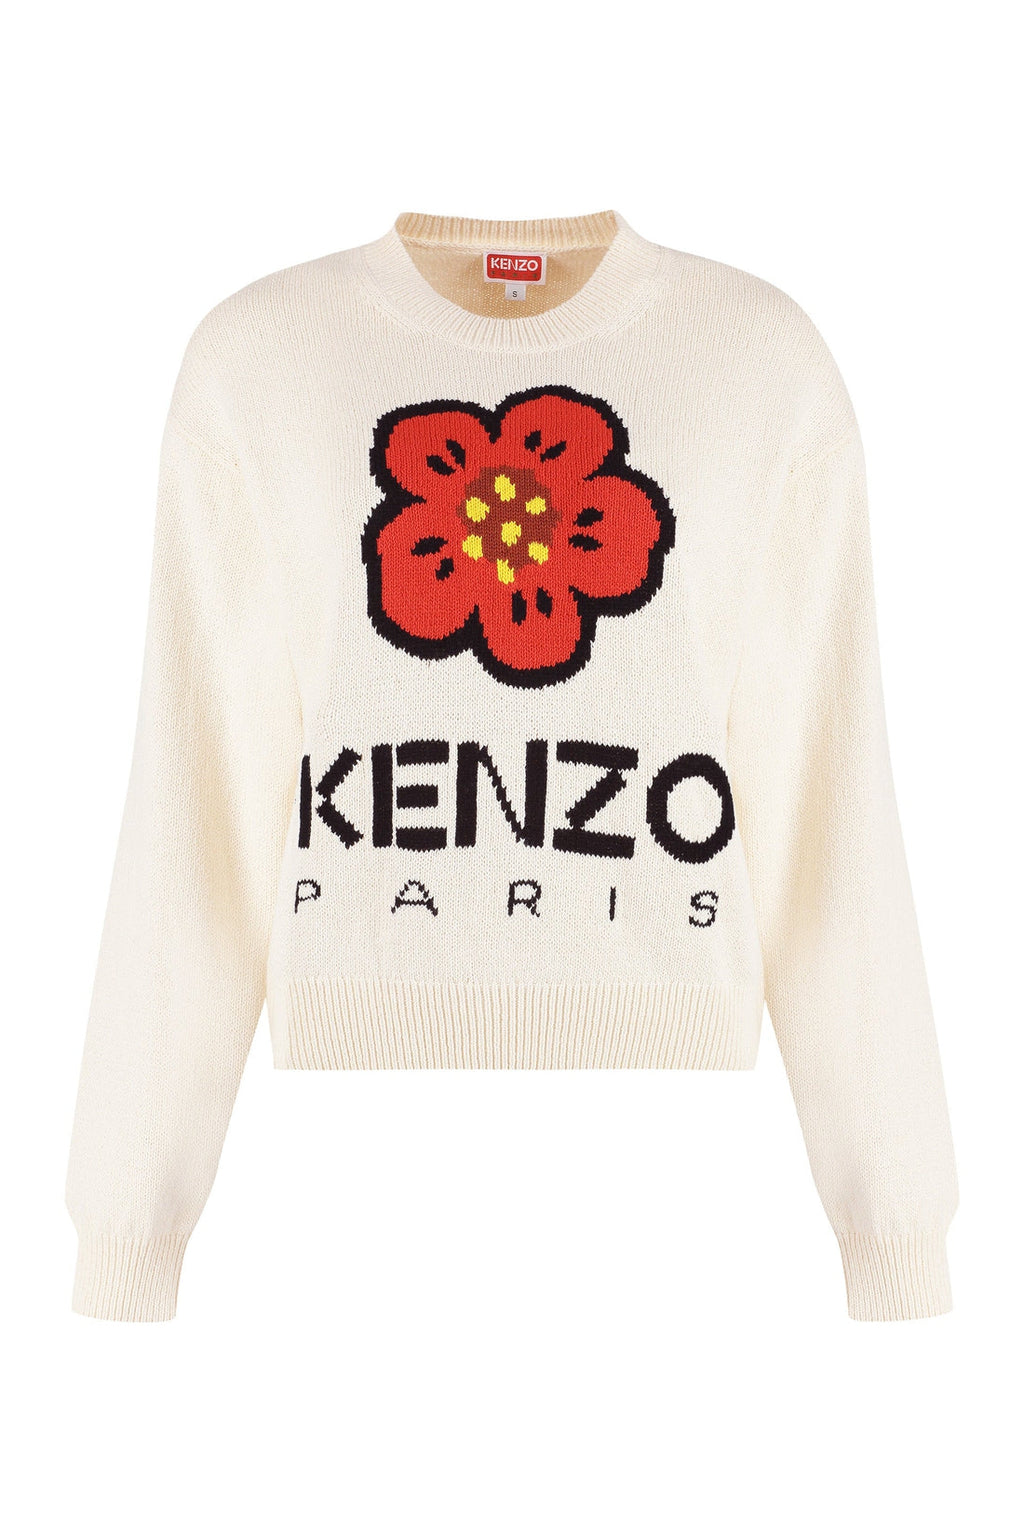 Kenzo-OUTLET-SALE-Long sleeve crew-neck sweater-ARCHIVIST